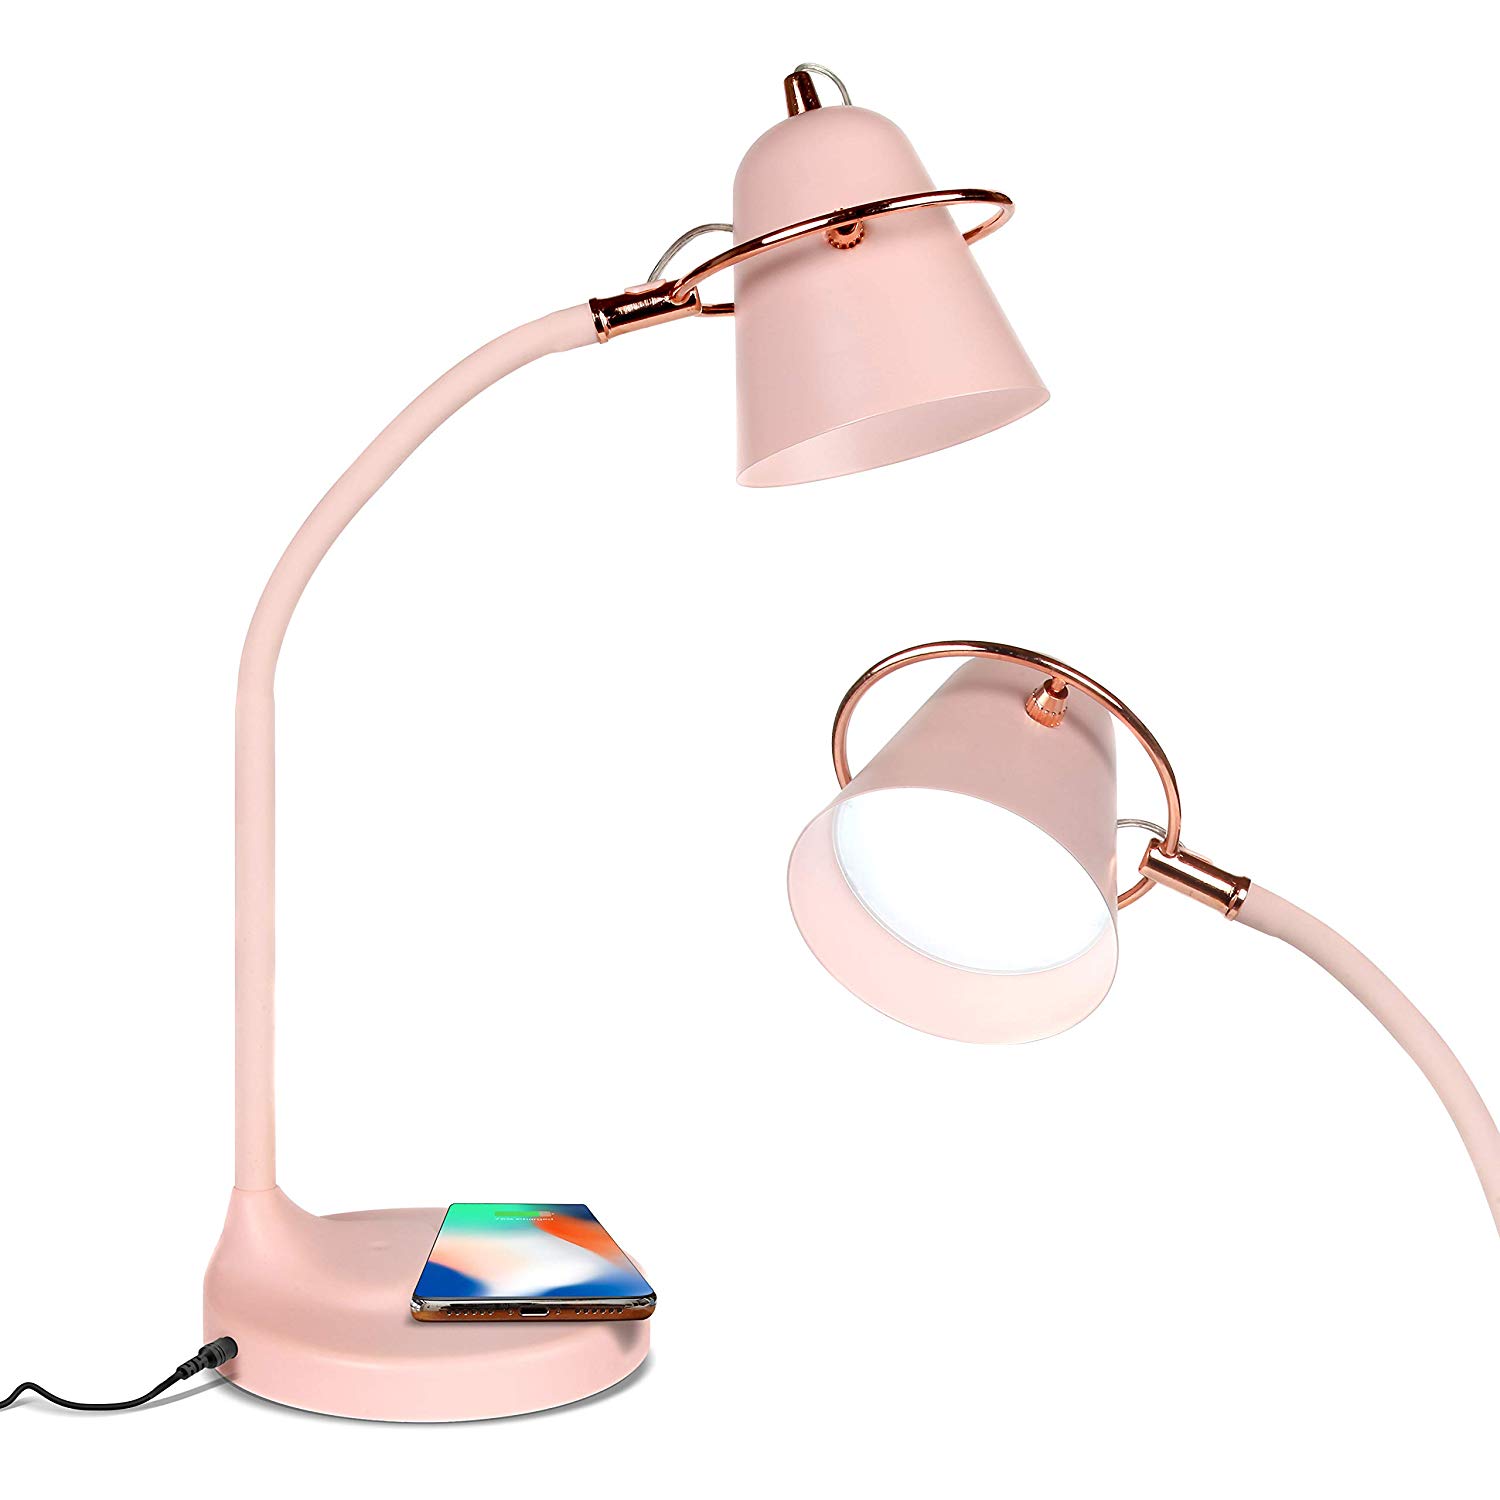 LED table Lamp with Wireless Charger, USB charging port Featured Image